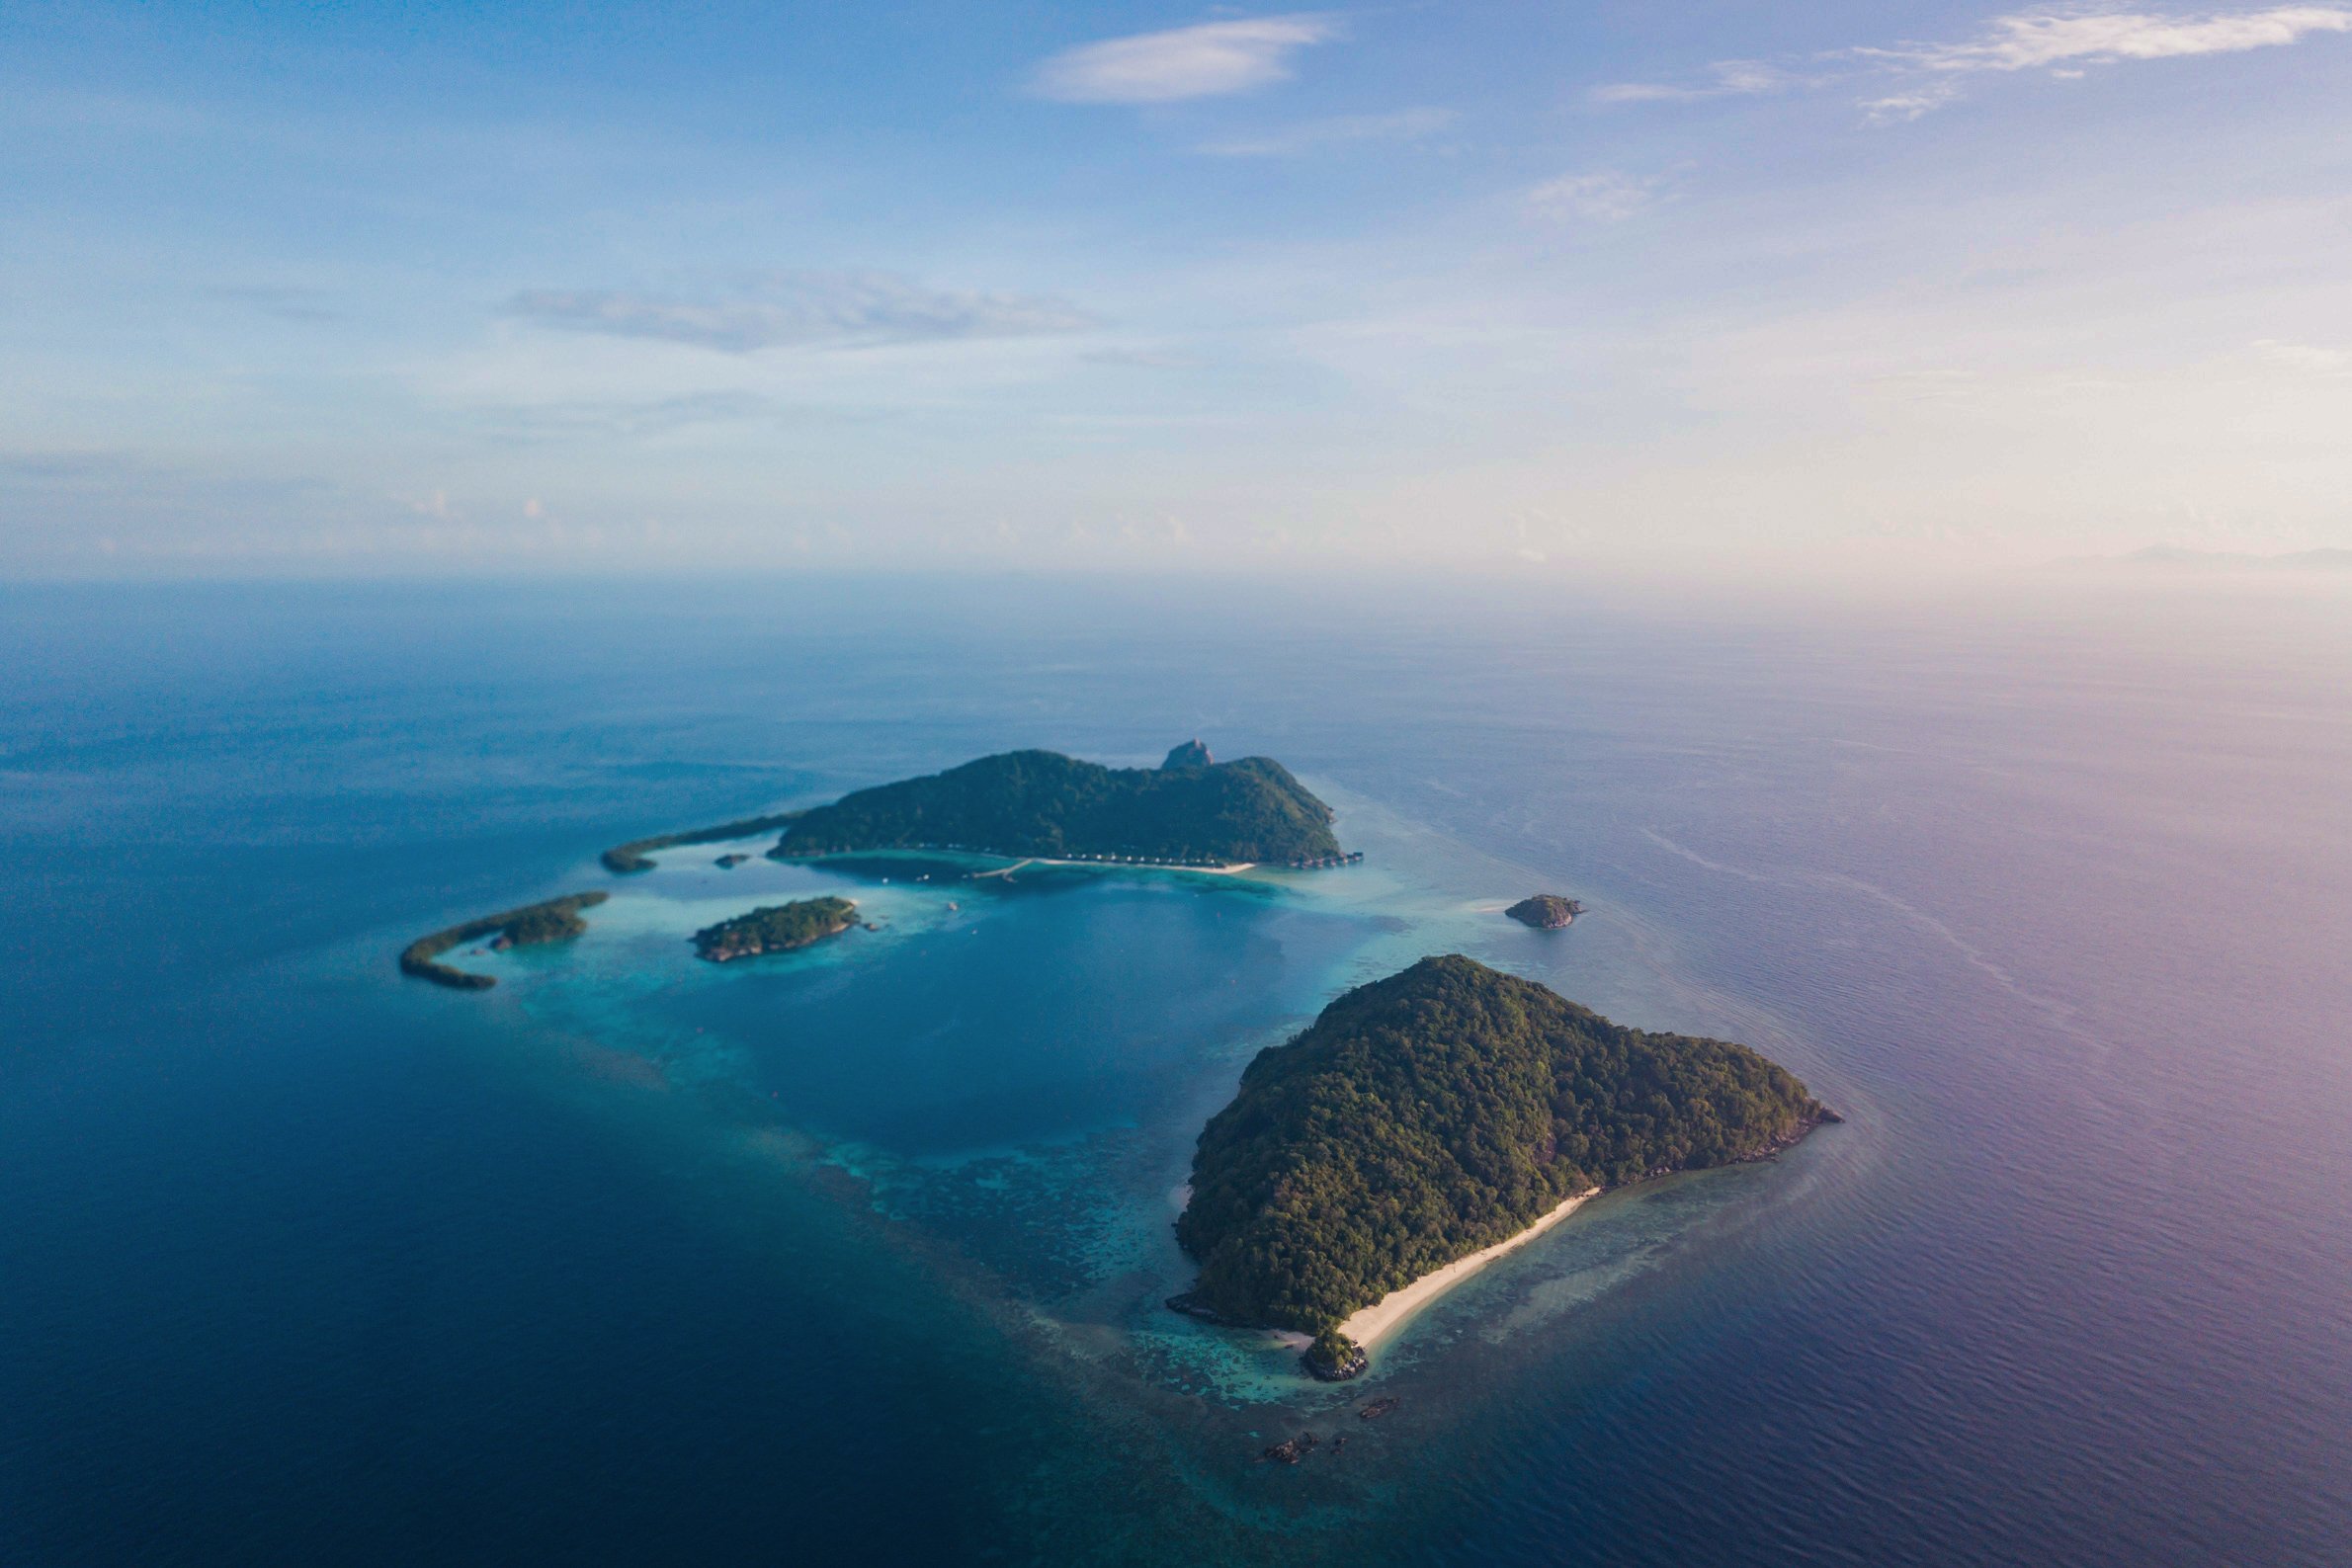 Bawah Reserve, Indonesia, Not just one island... 6 private islands, 13 beaches, 3 lagoons to discover